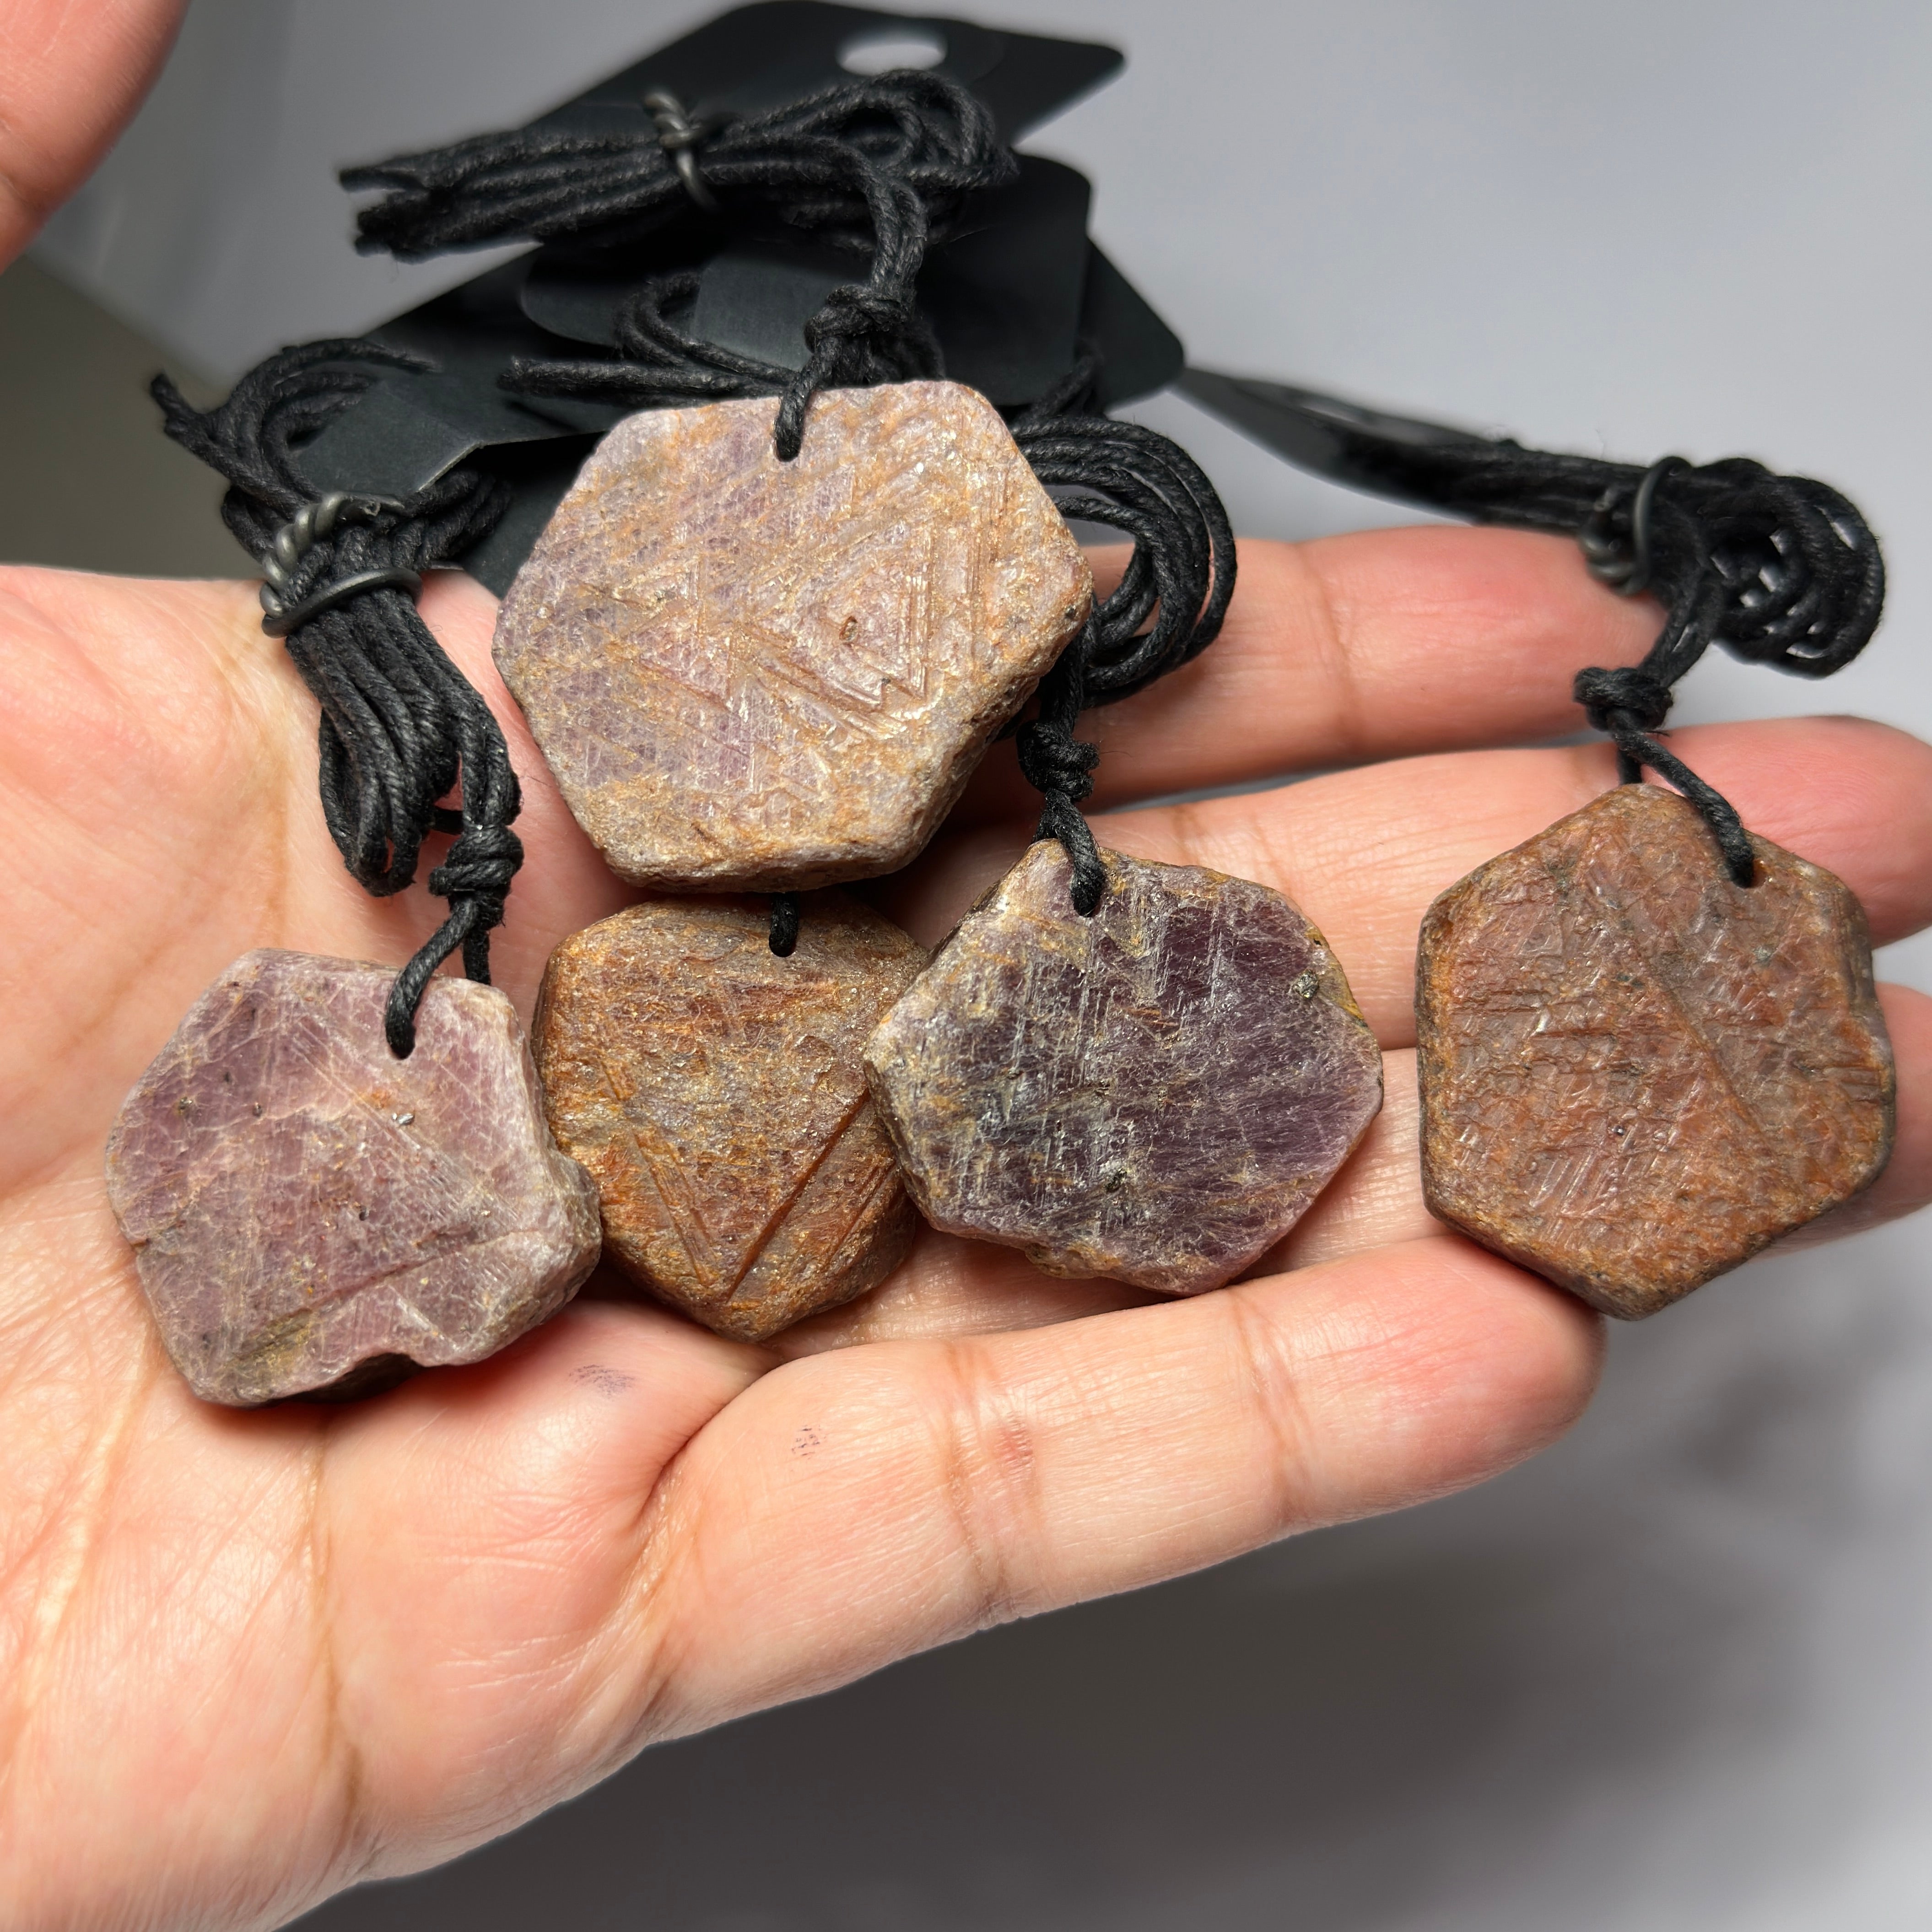 5 pcs Tanzanian Ruby / Sapphire Crystal Record Keepers pendants lot. Price is for all 5